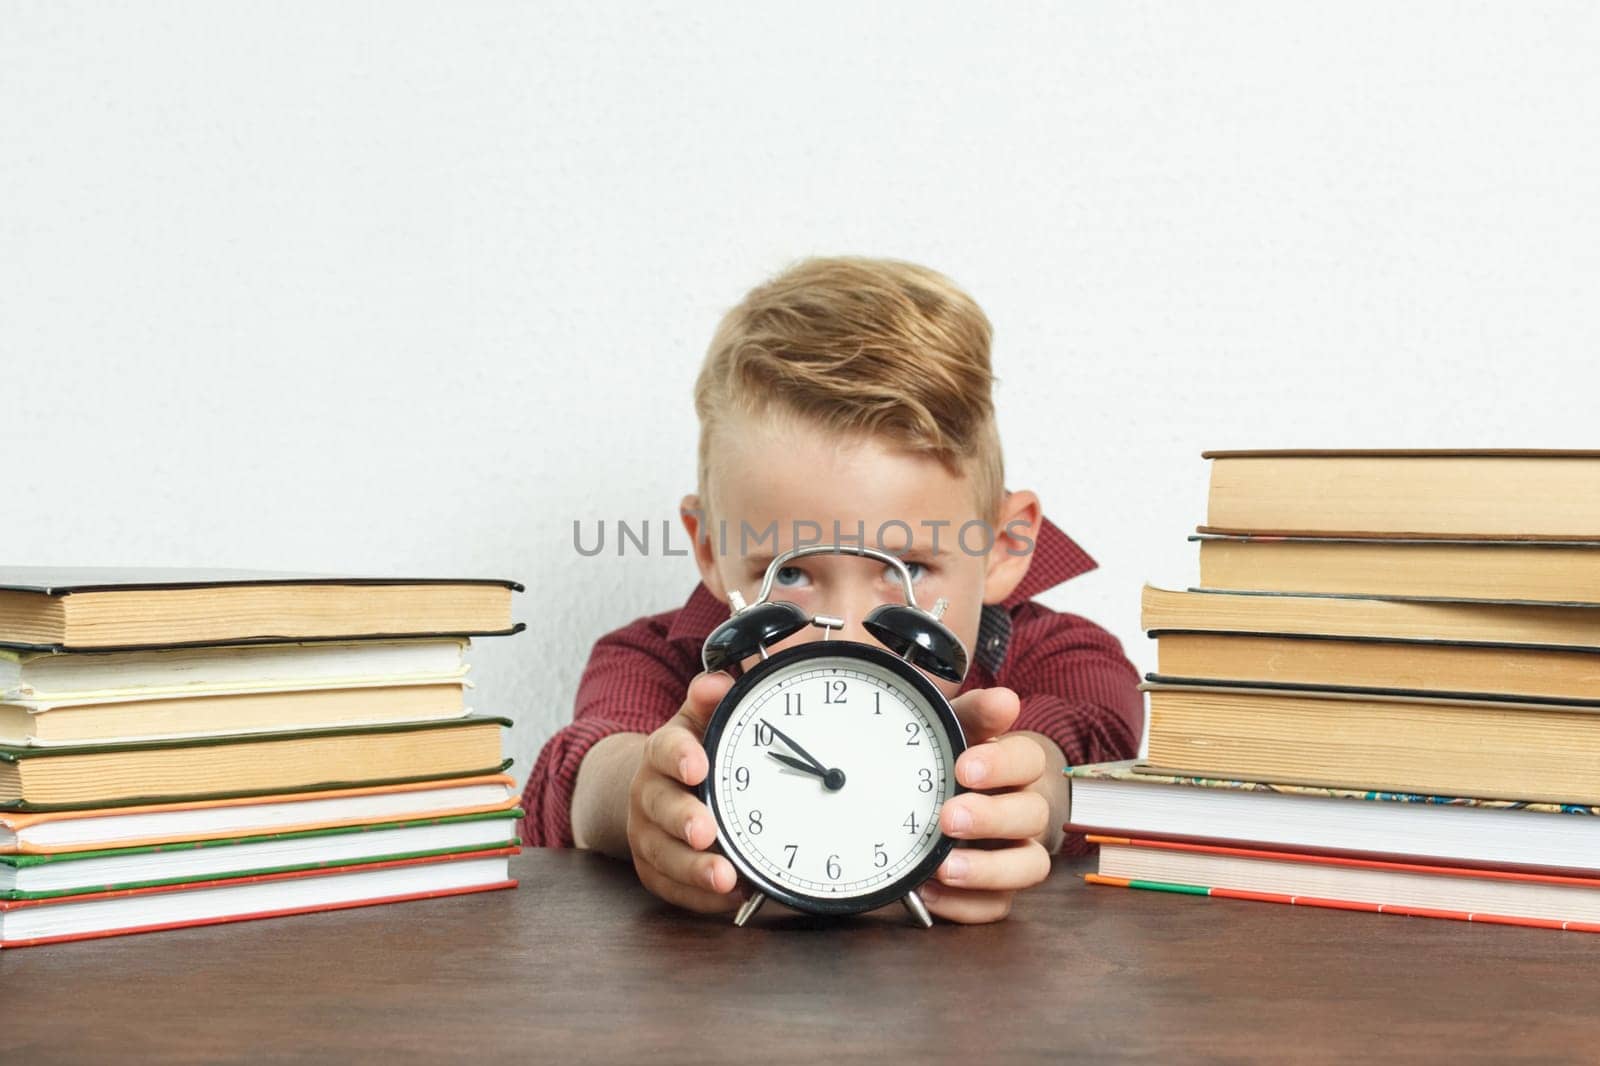 Education concept. The schoolboy sits at the table and holds an alarm clock in his hands. Sharpness of the image on the alarm clock